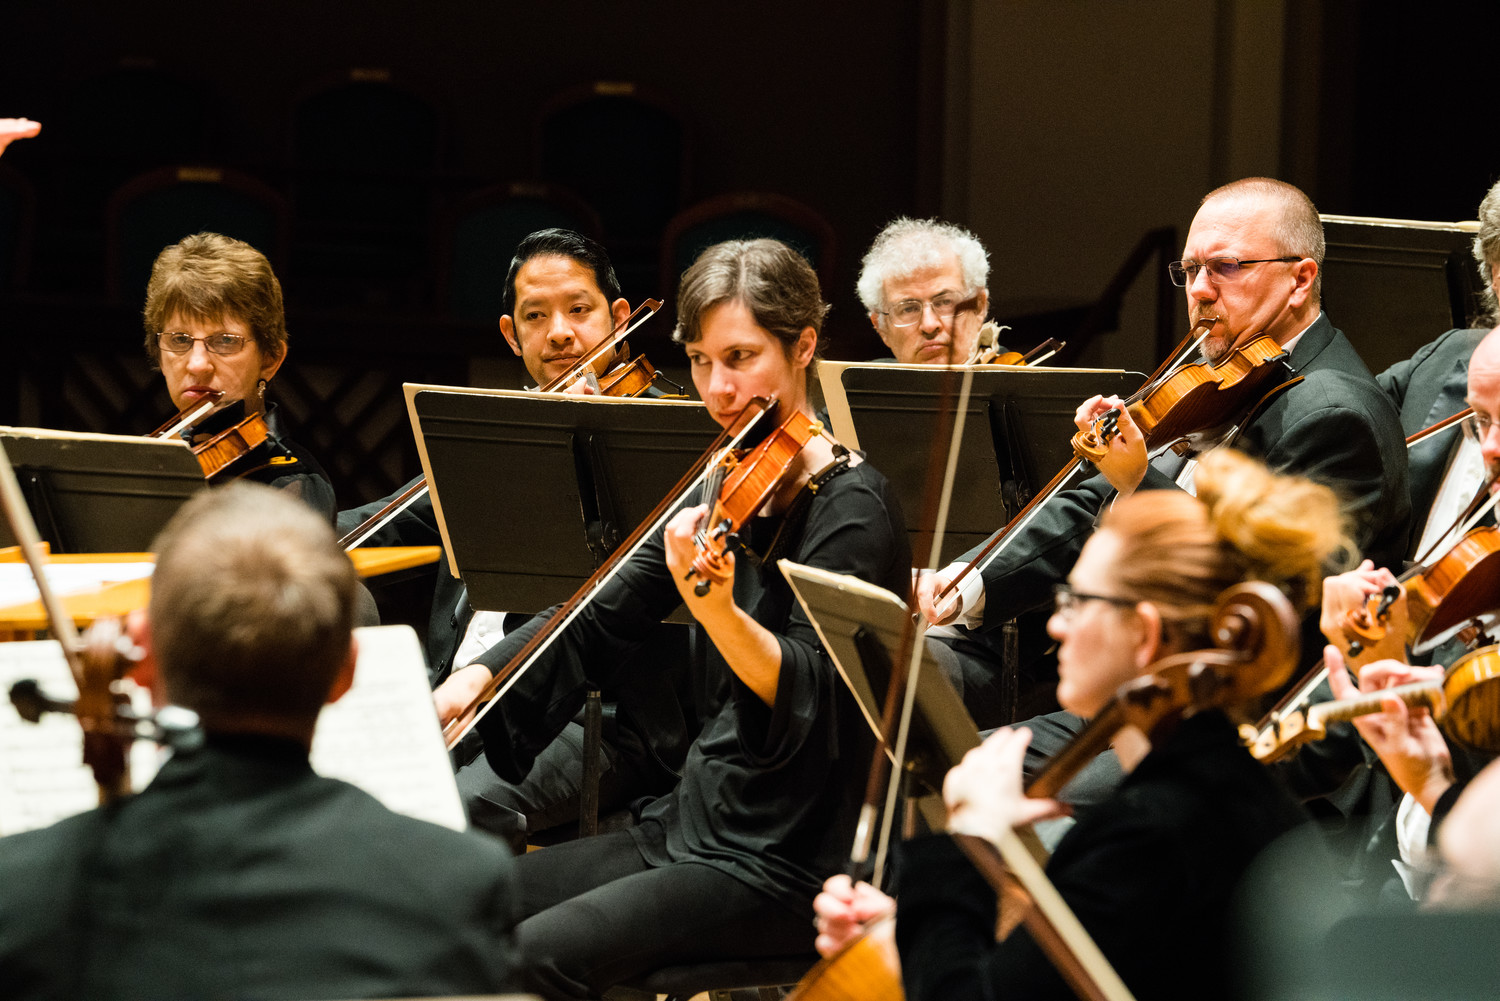 The Jacksonville Symphony will perform at the Kennedy Center in March 2020 as one of four American orchestras selected for the Kennedy Center and Washington Performing Arts festival in Washington, D.C.